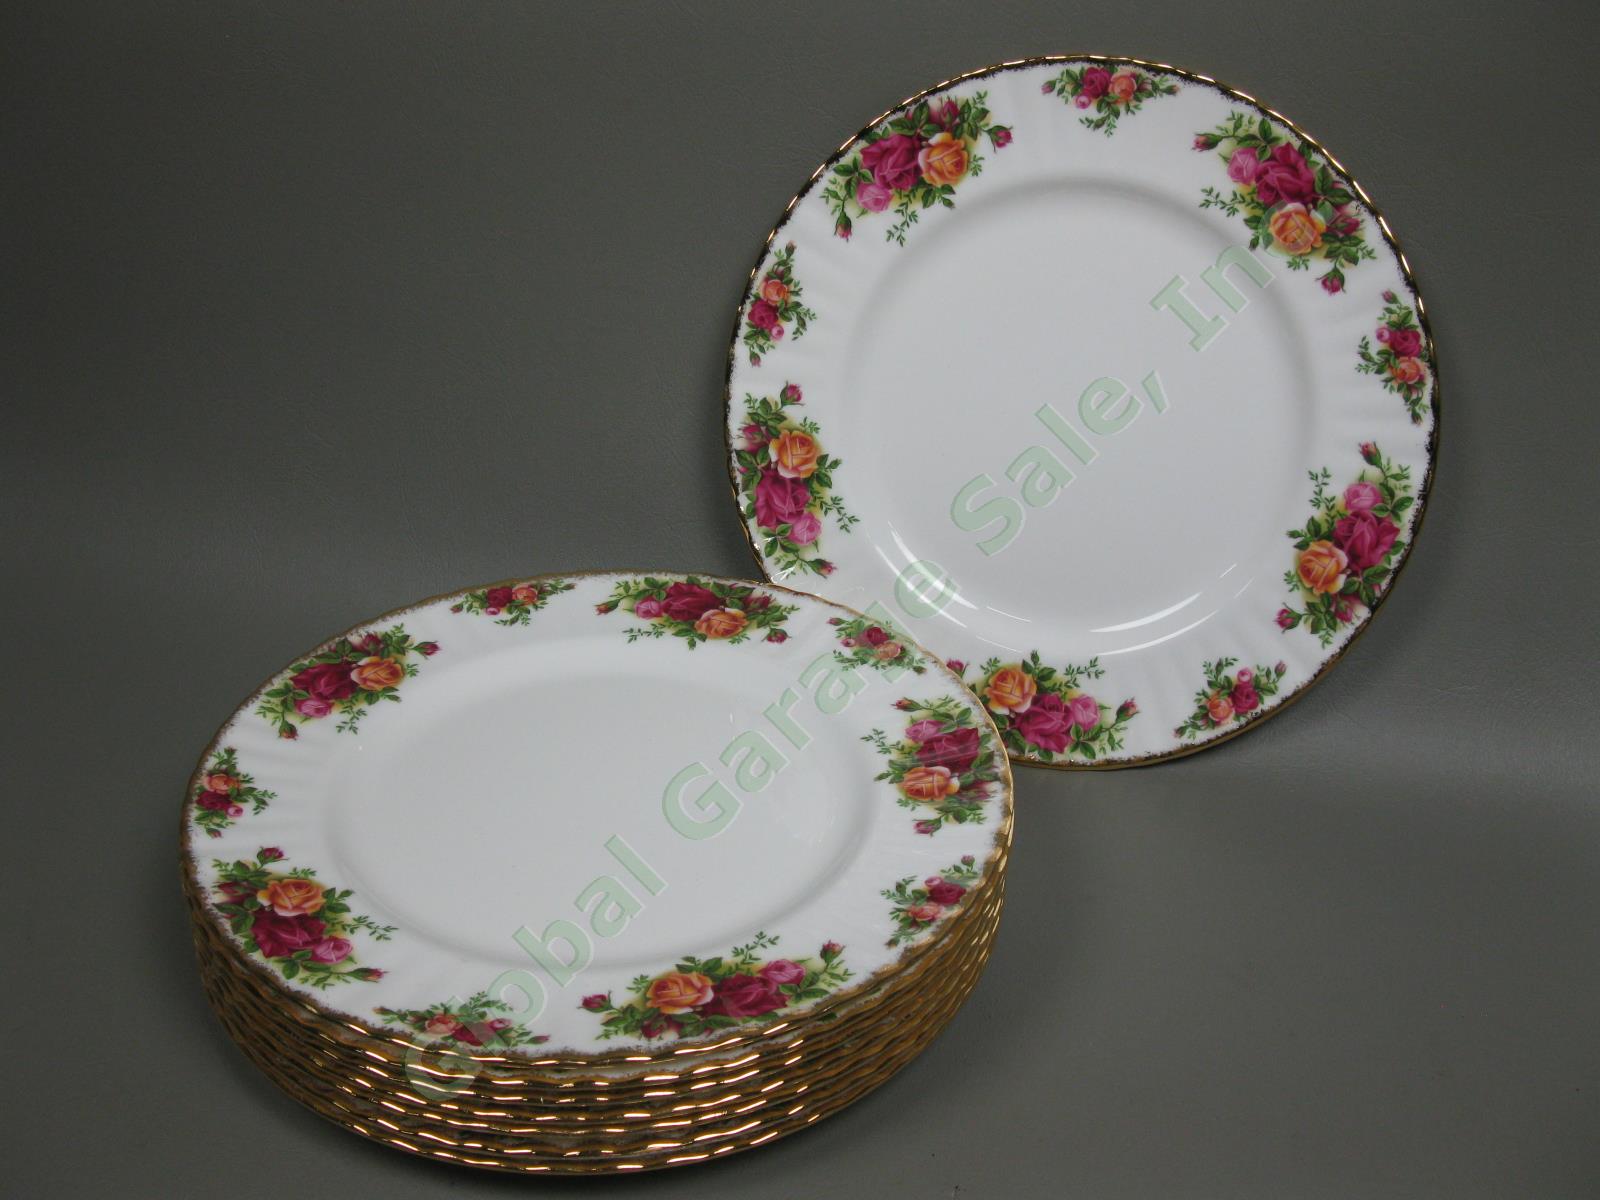 8 Royal Albert Old Country Roses Dinner Plate Fluted Gold Trim Bone China Set NR